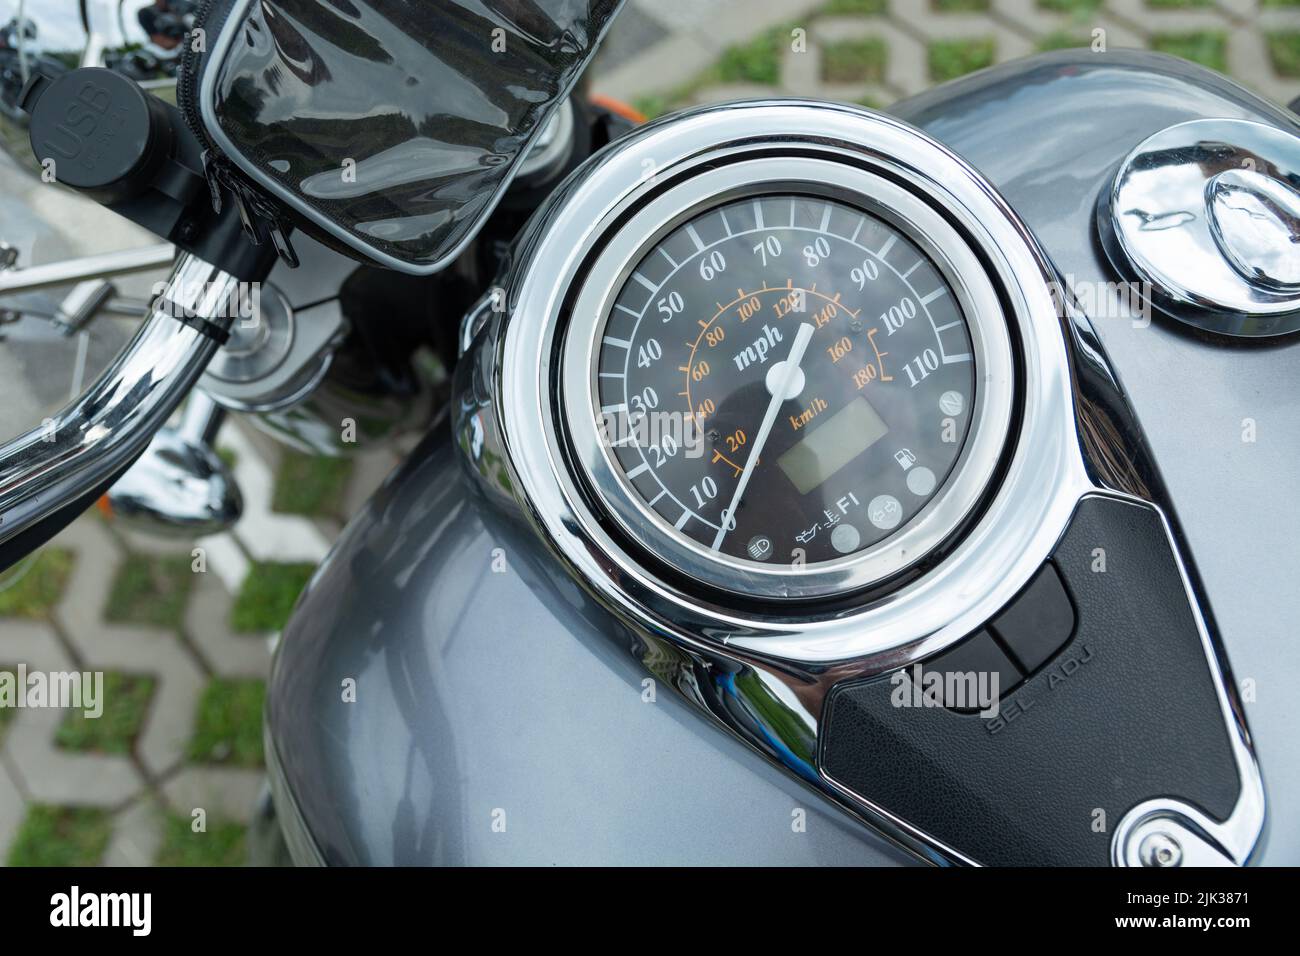 View of the speedometer on the fuel tank of a motorcycle Stock Photo